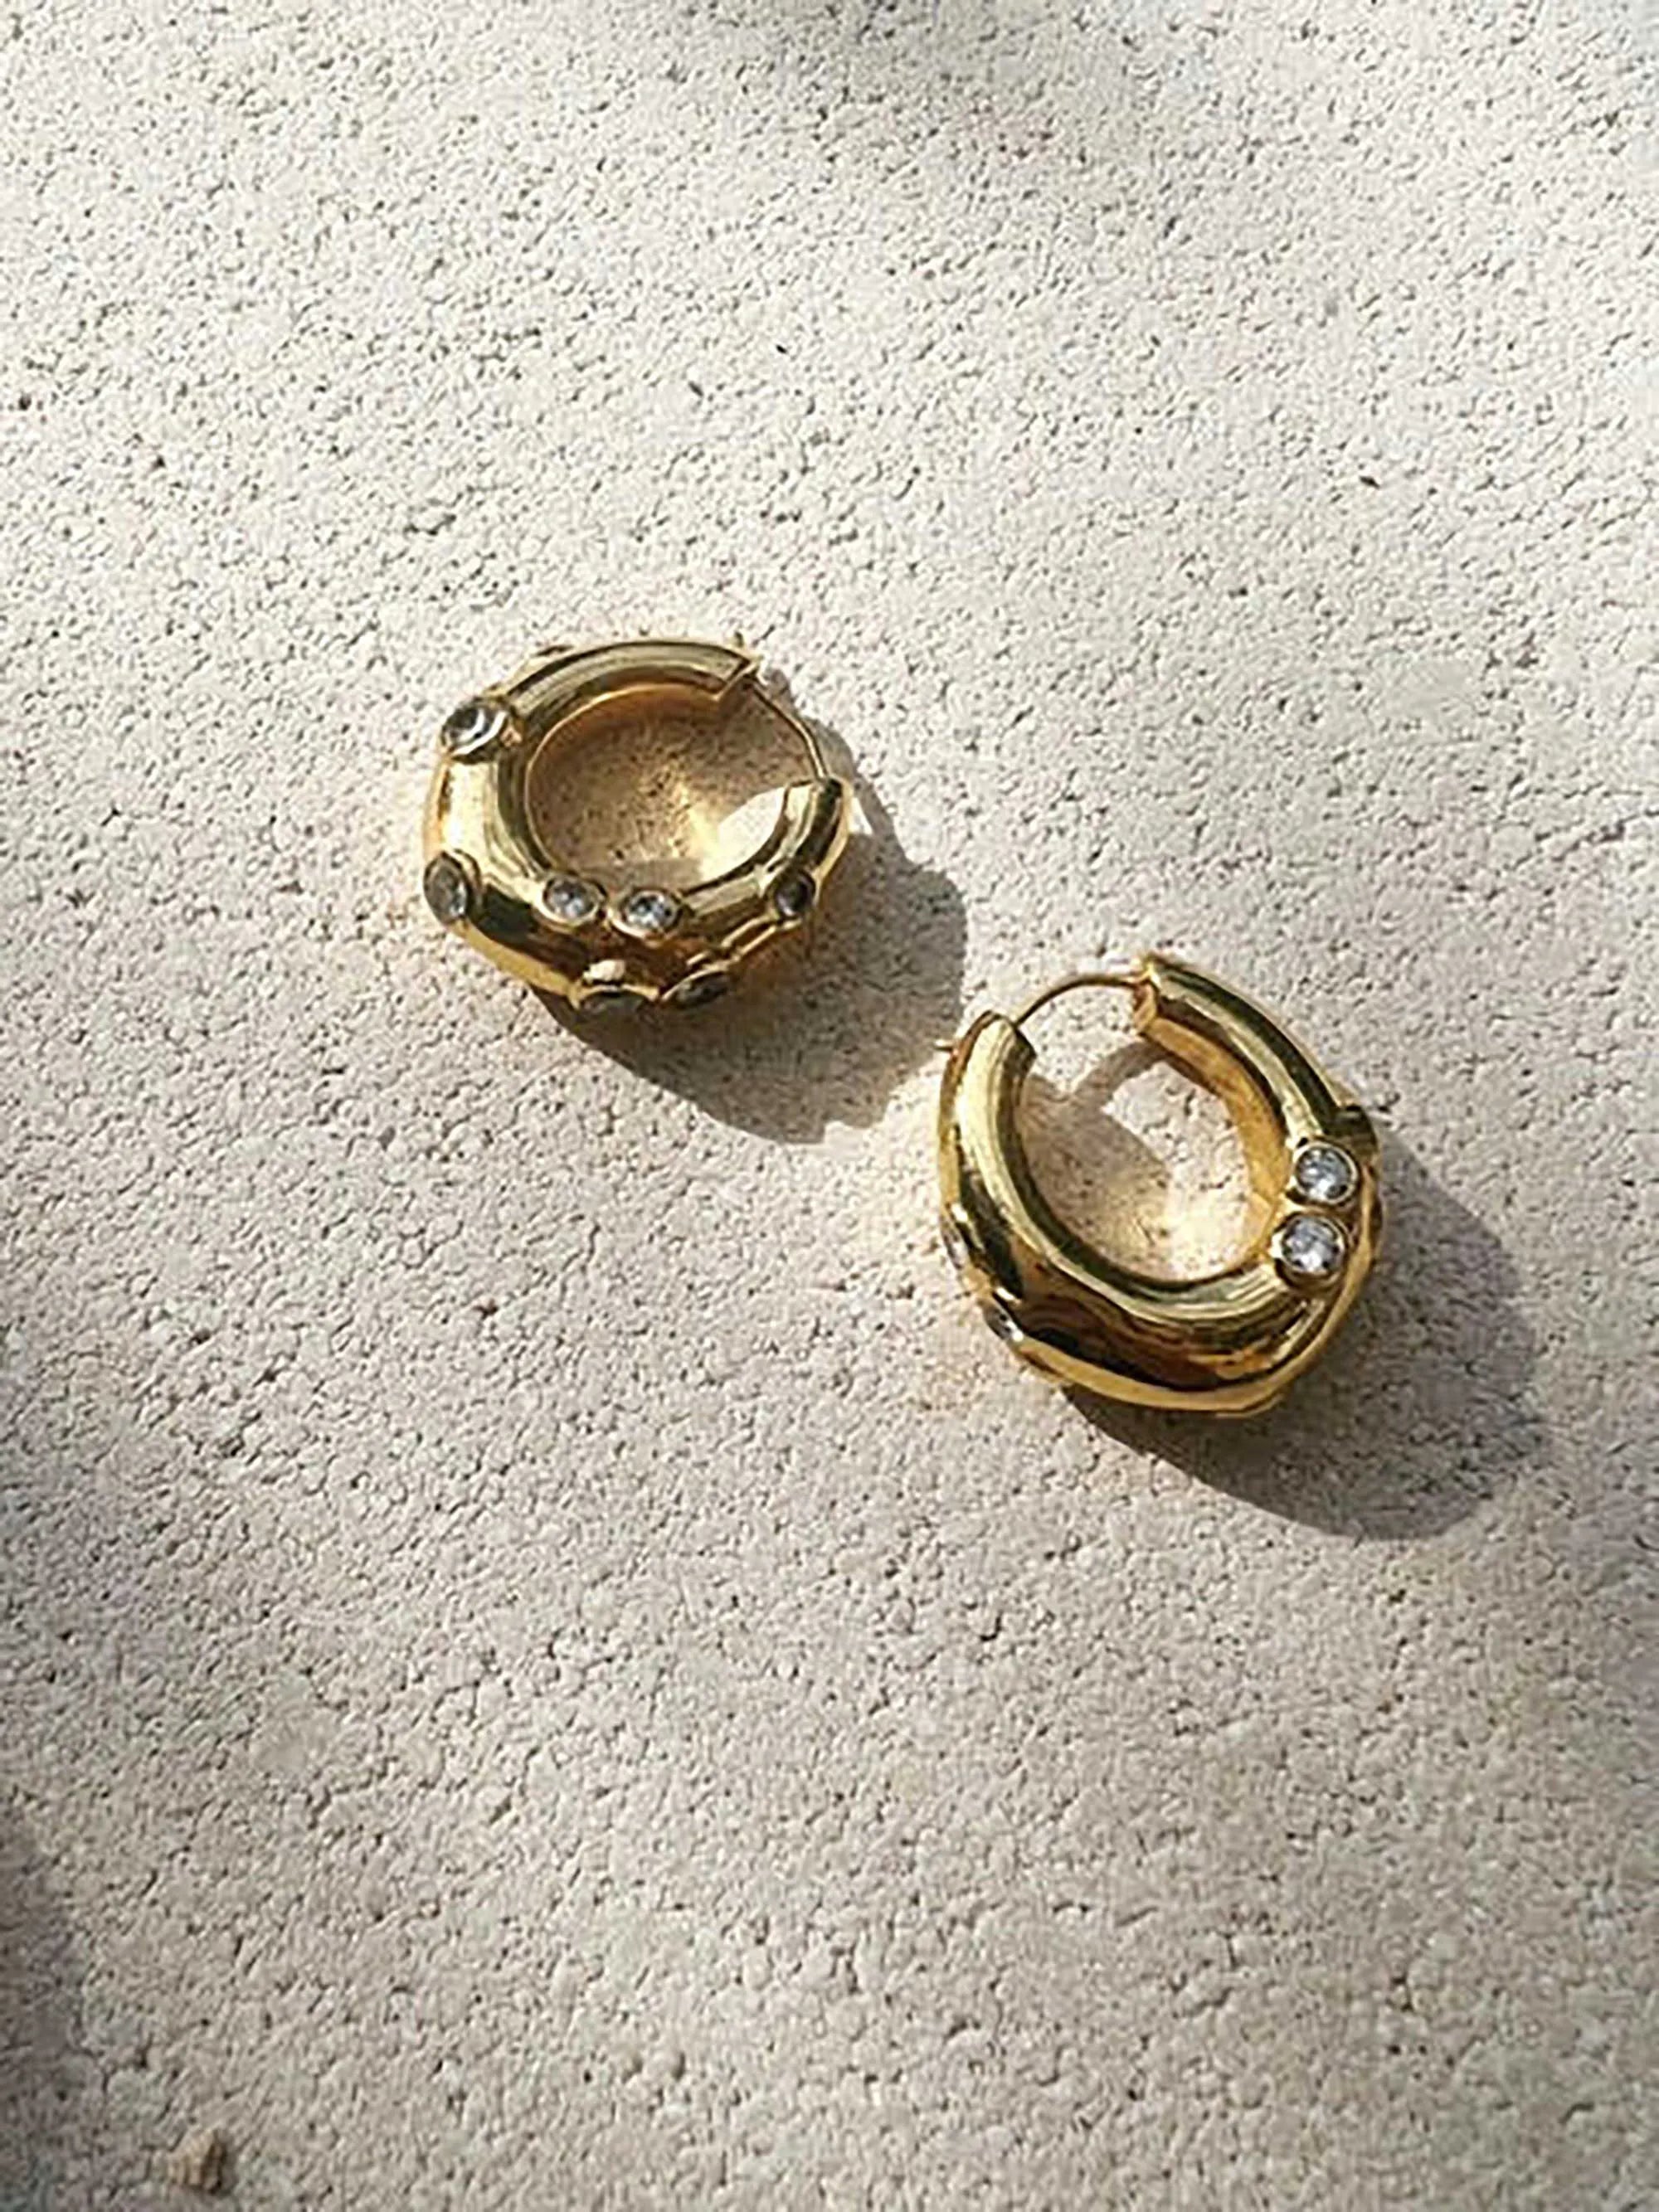 A pair of medium-sized chunky hoop earrings adorned with sparkling crystals, known as Shyla - Oren Hoops - Gold, laying on the ground.